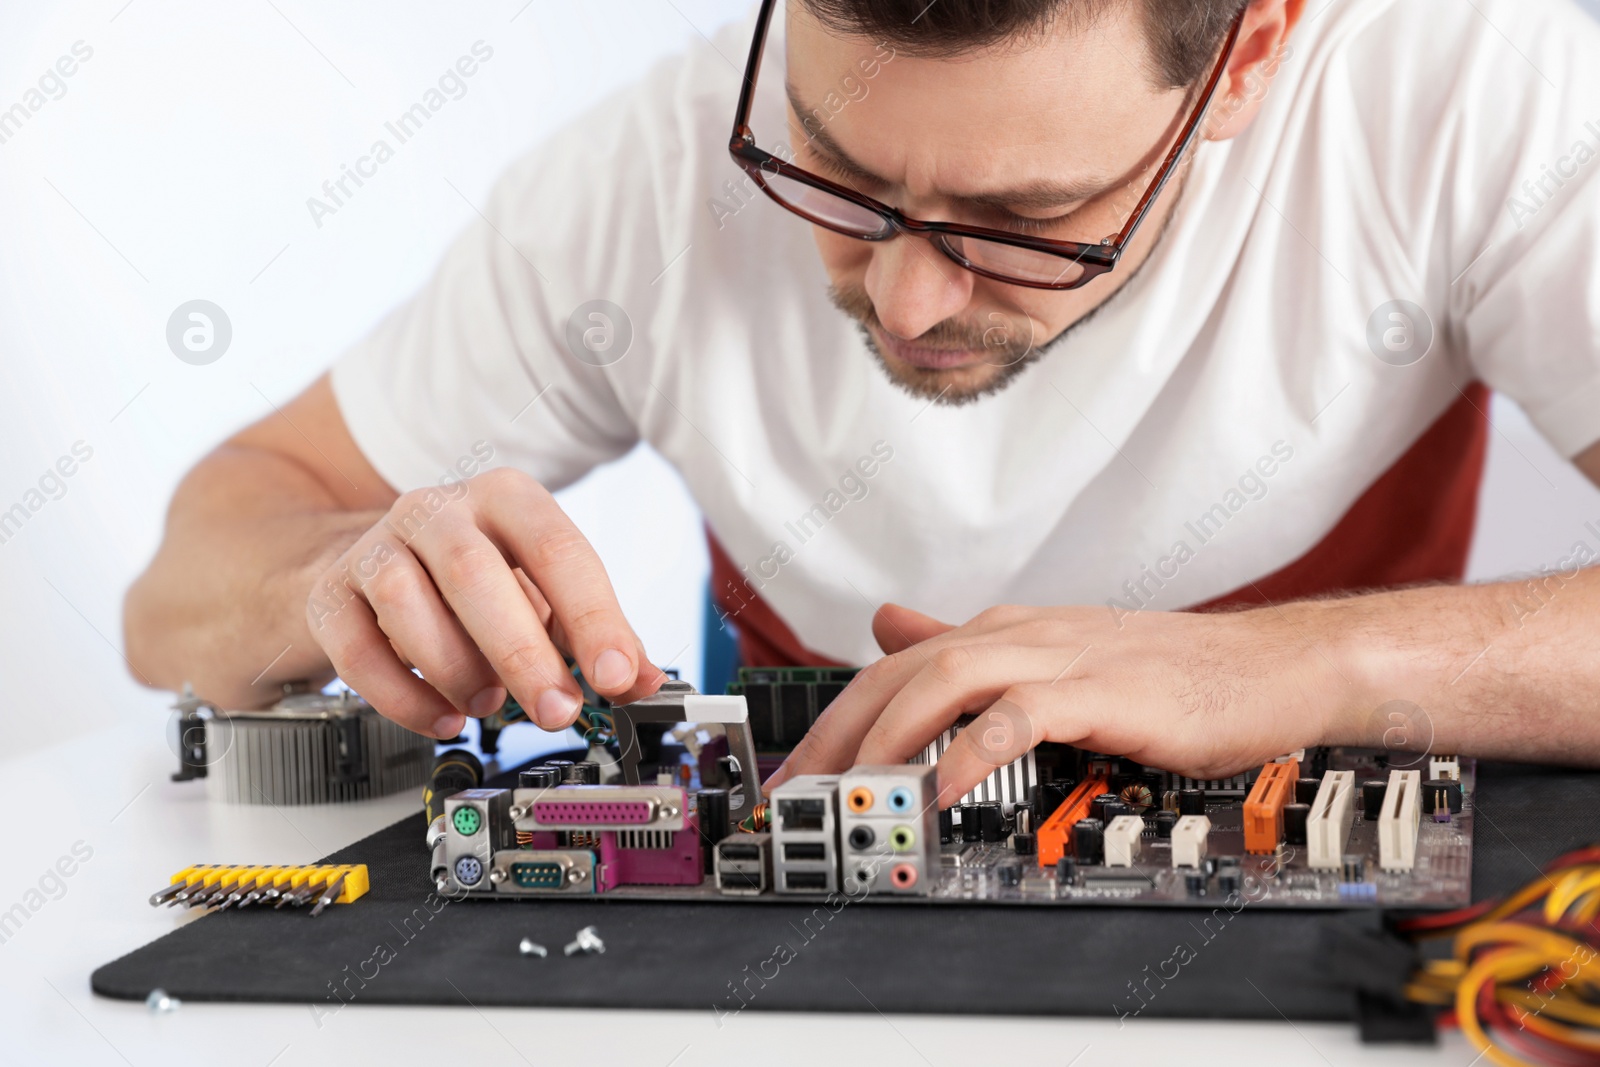 Photo of Male technician repairing motherboard at table against light background